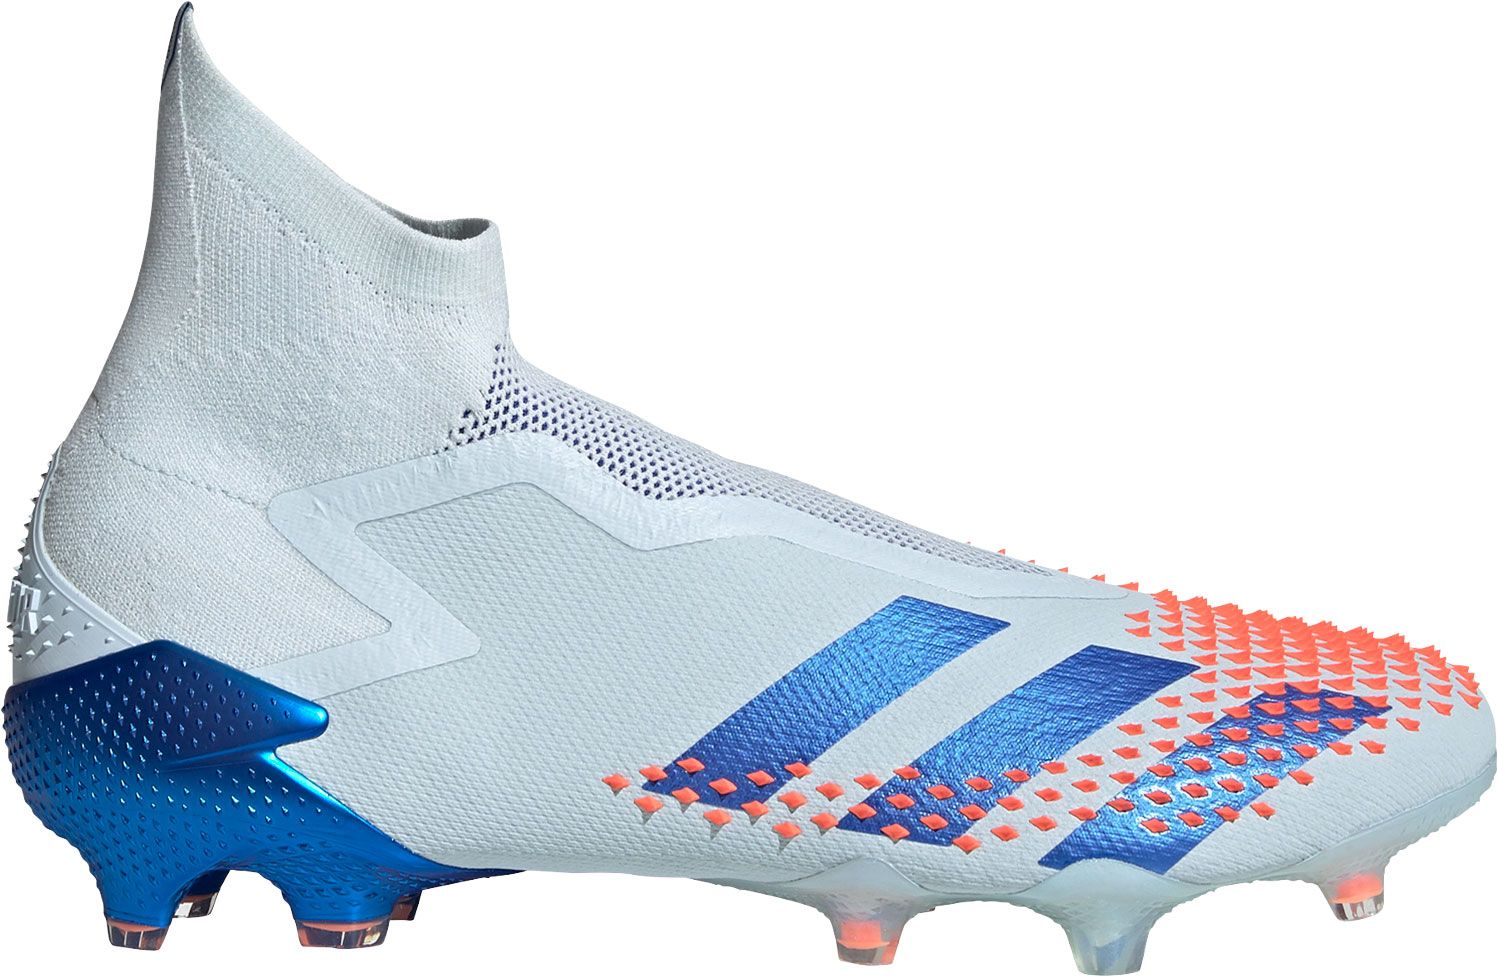 new adidas soccer cleats coming out